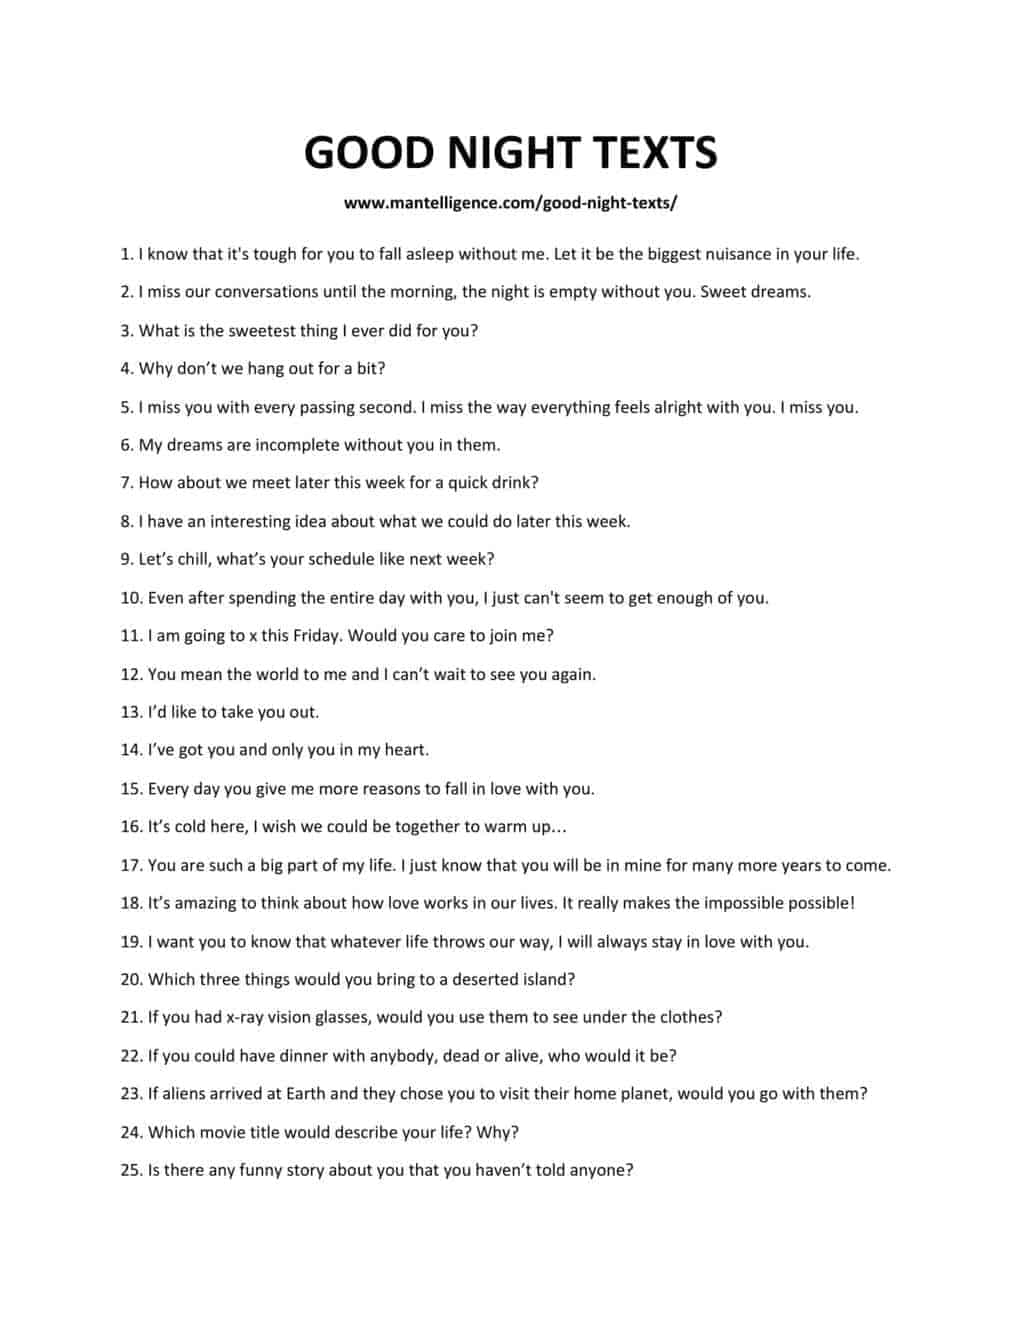 Sweetest to goodnight say way the 25 Texts